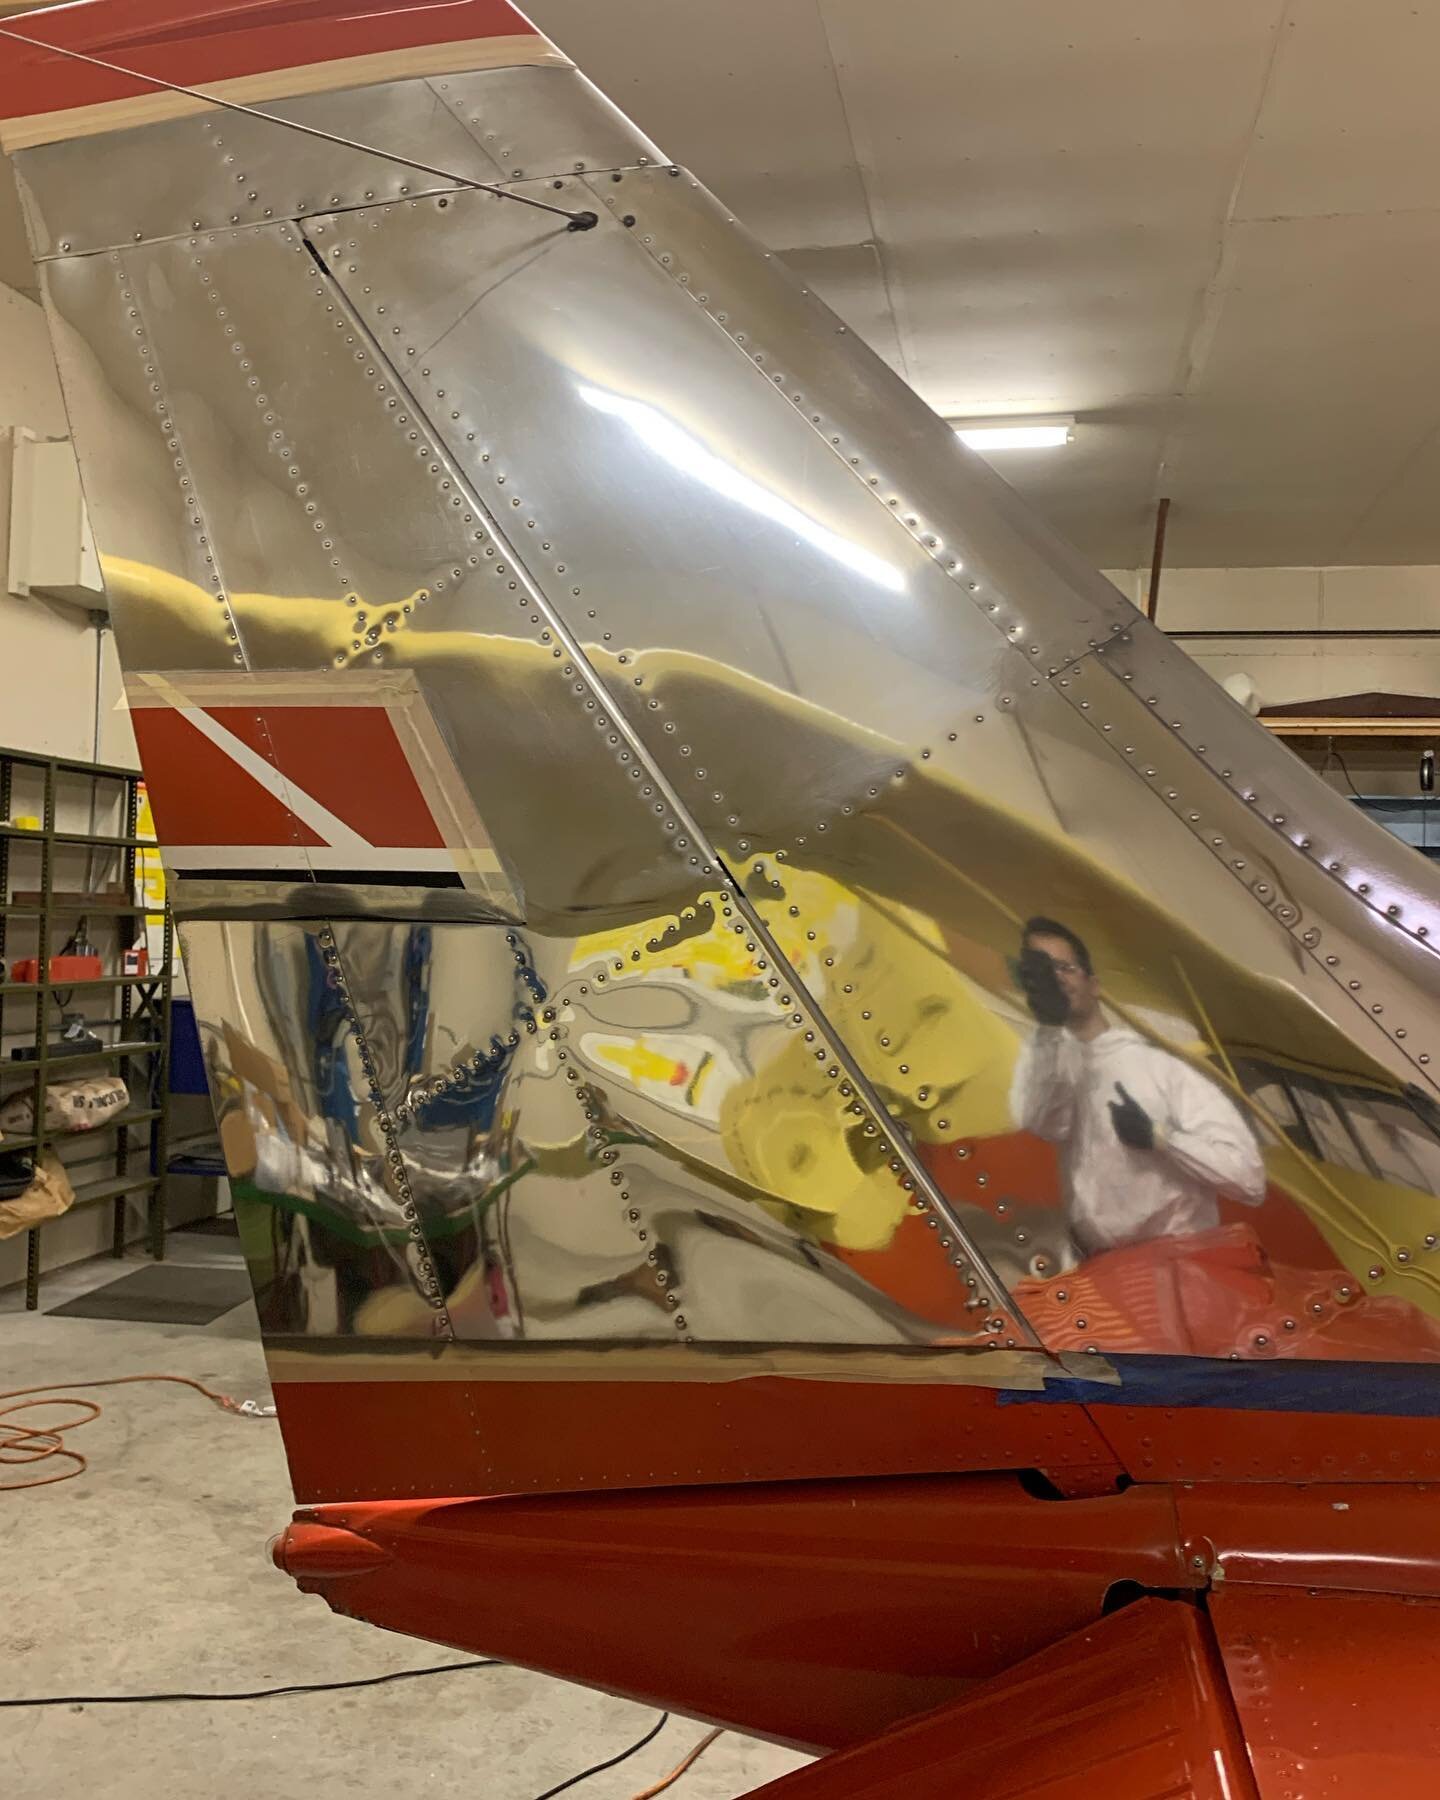 Lower third is polished. Top is still dull. 

This detail is brought to you by the fine folks at the 3M masking tape division. 

#loveyourplaneagain #cessna @3m @nuvitechemical